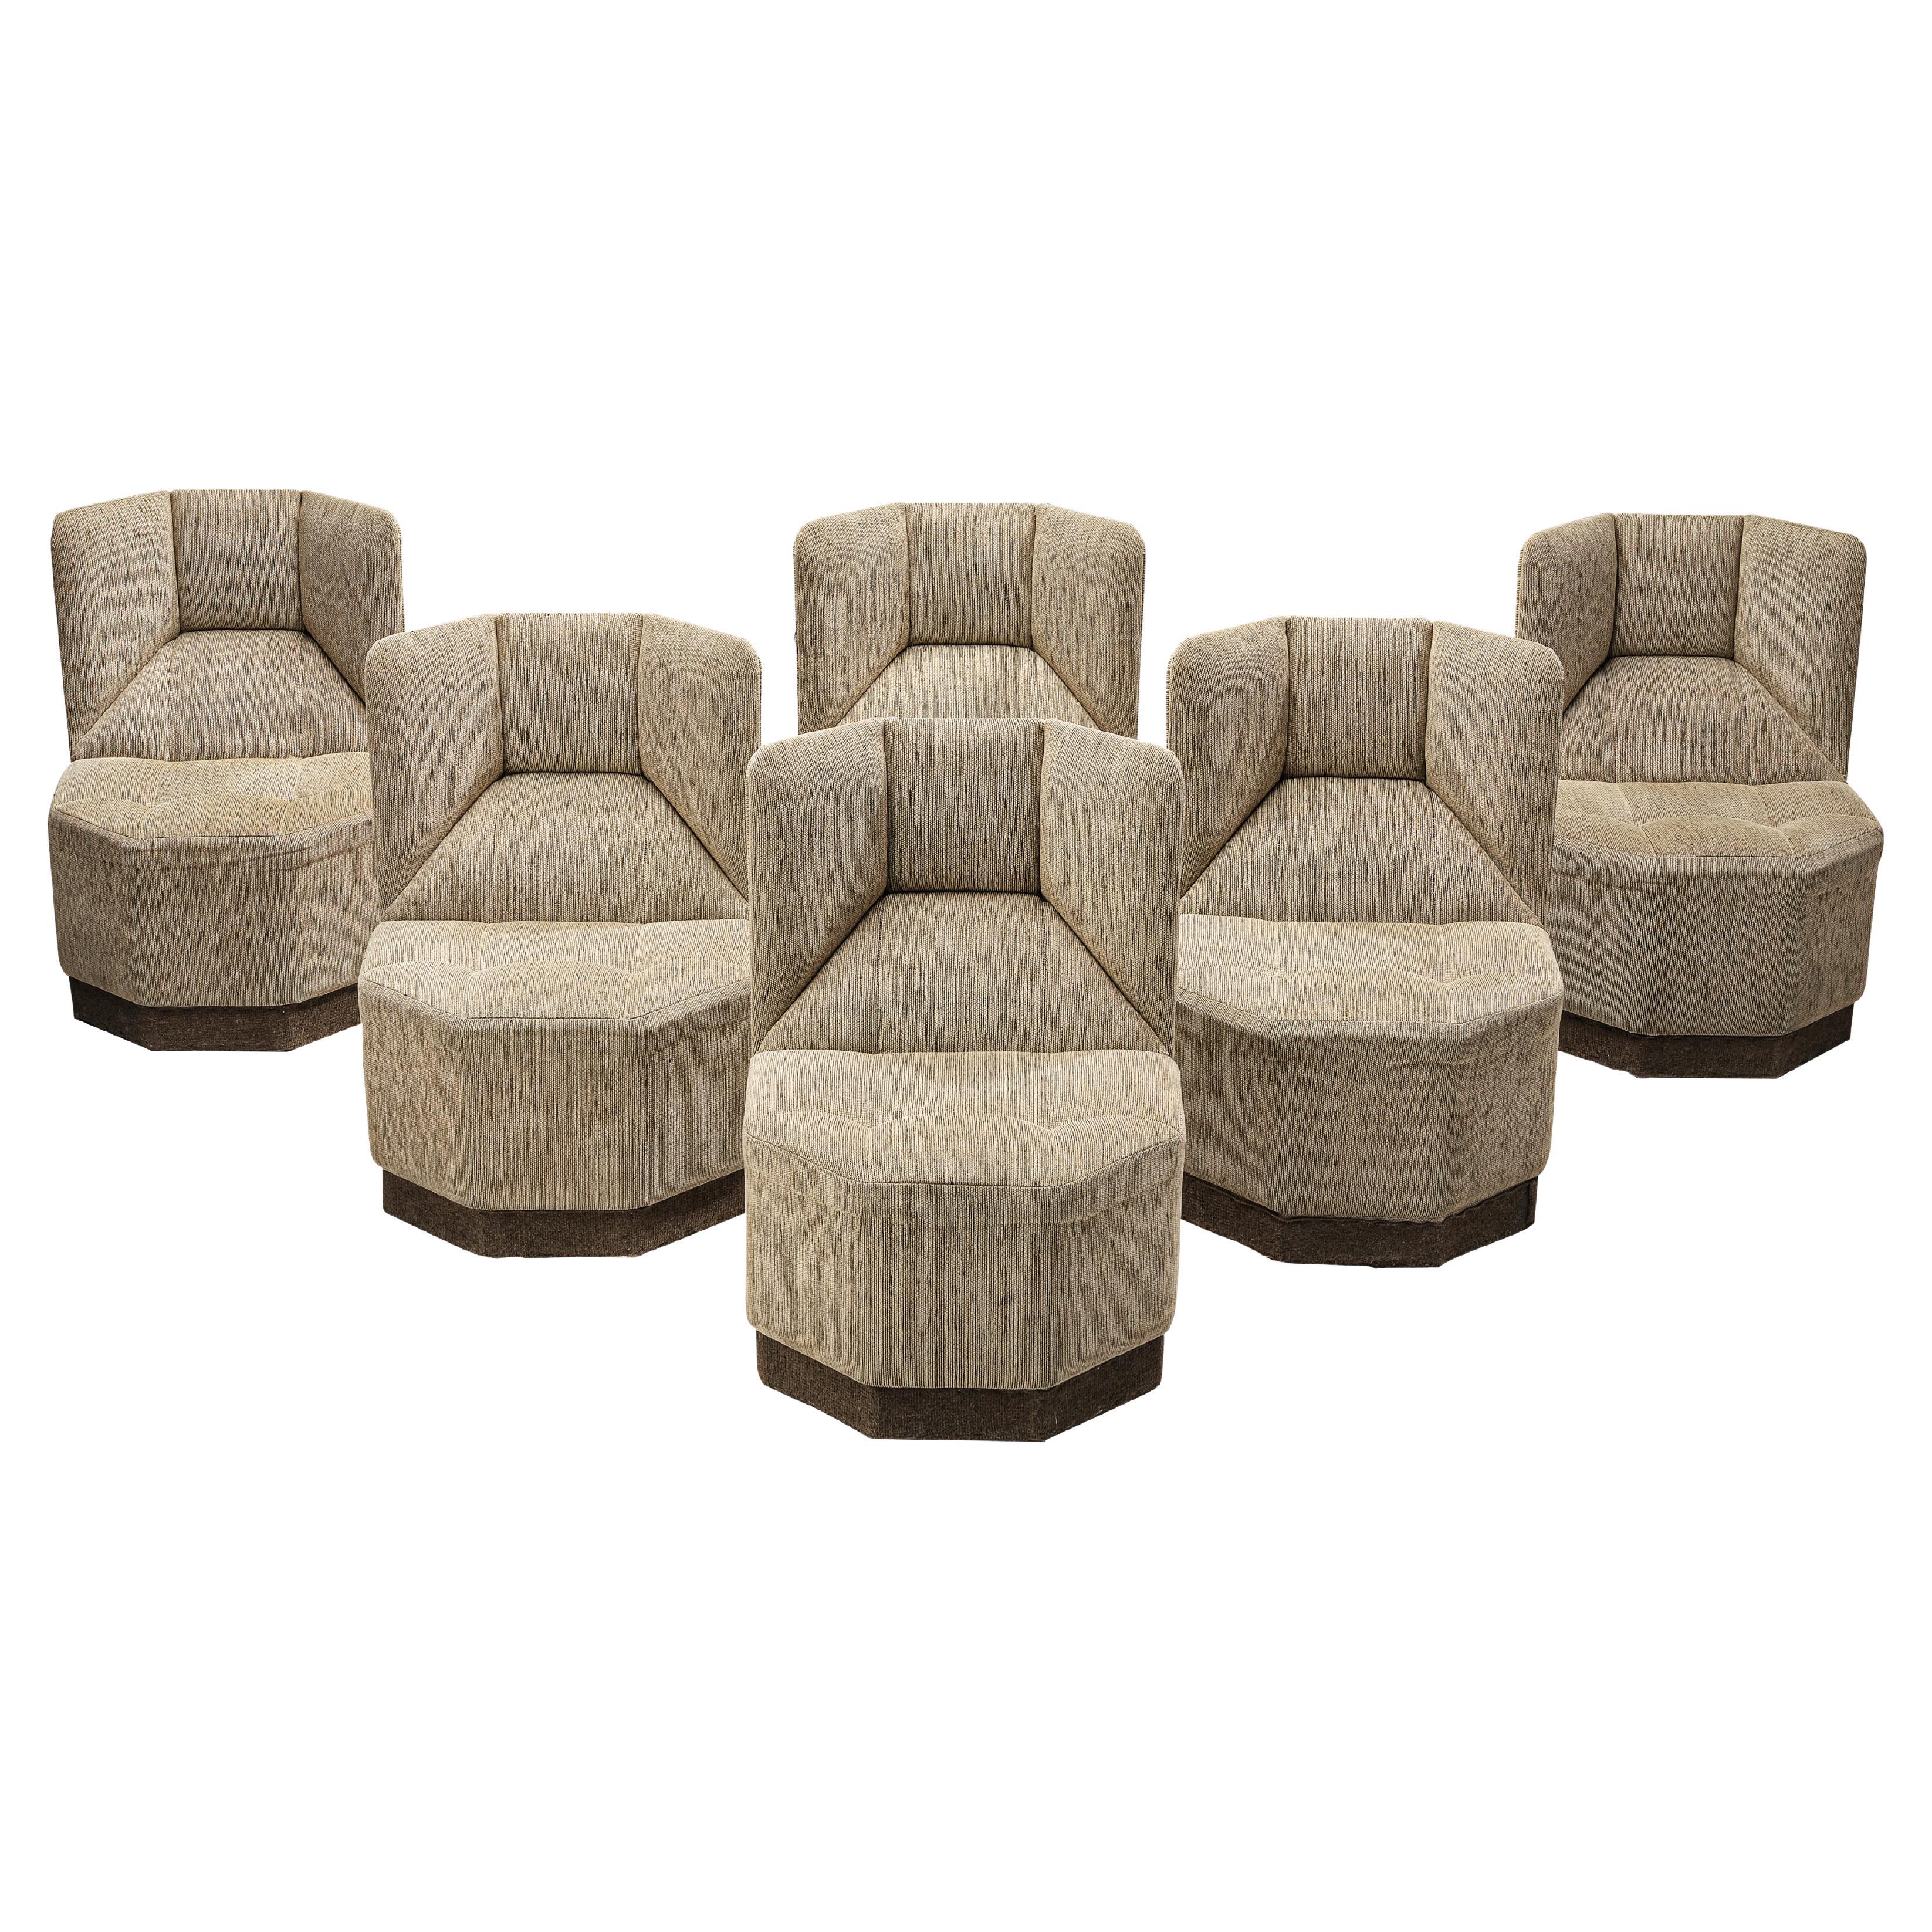 Set of Six Modular Octagonal Chairs in Grey Fabric Upholstery